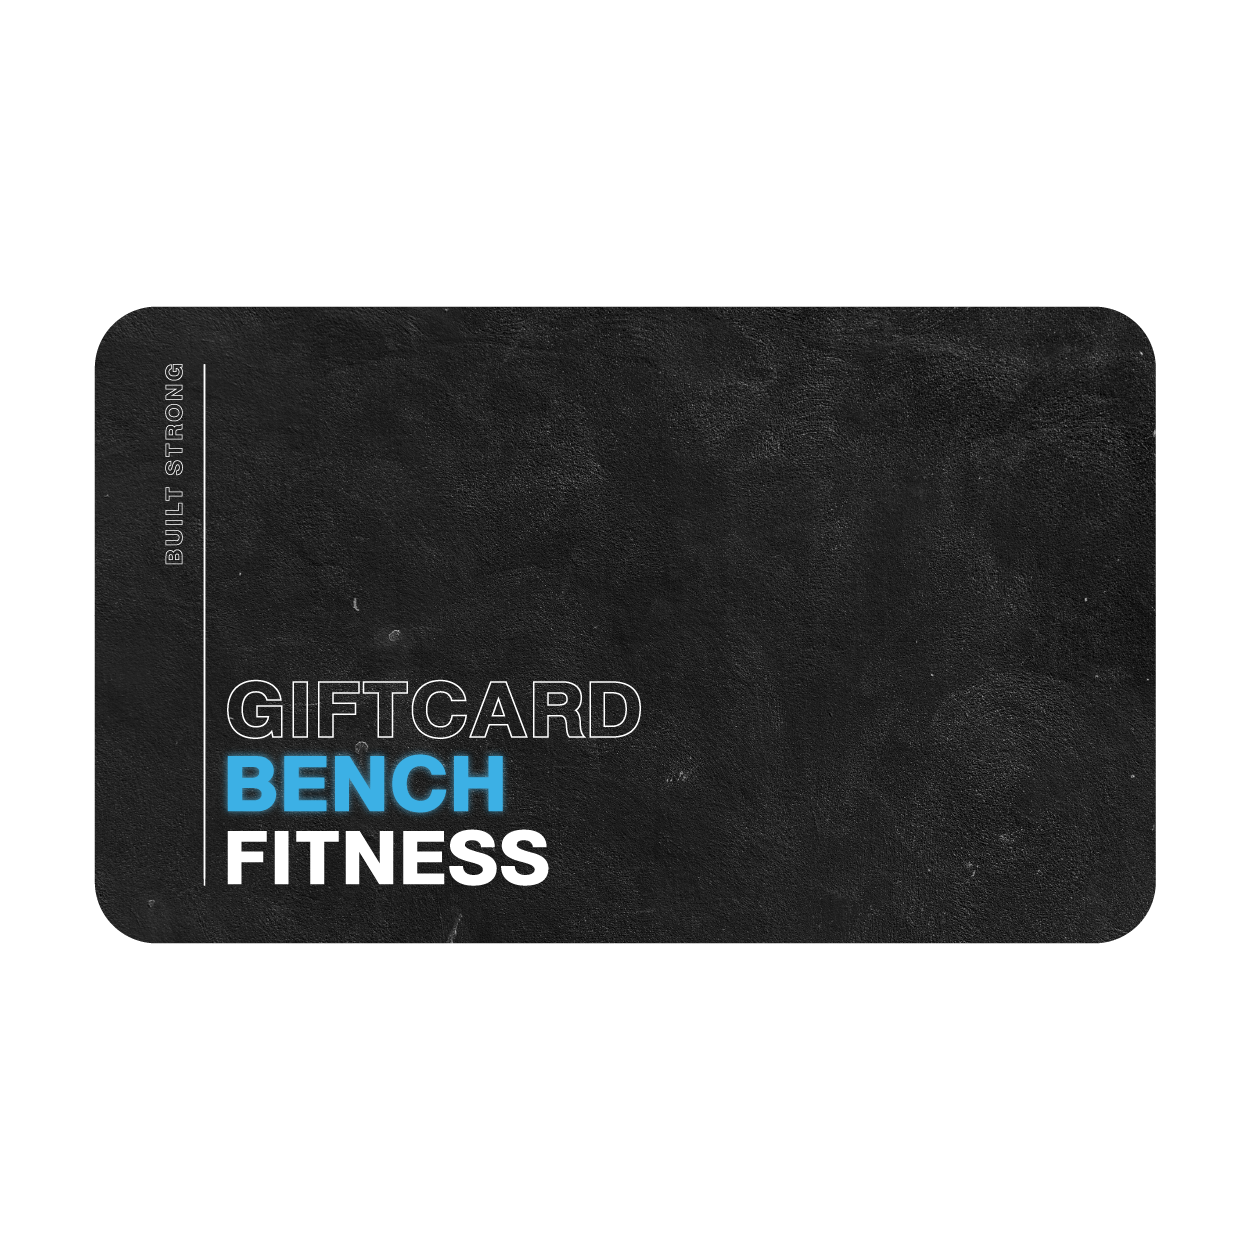 Bench Fitness Gift Card - Bench Fitness Equipment